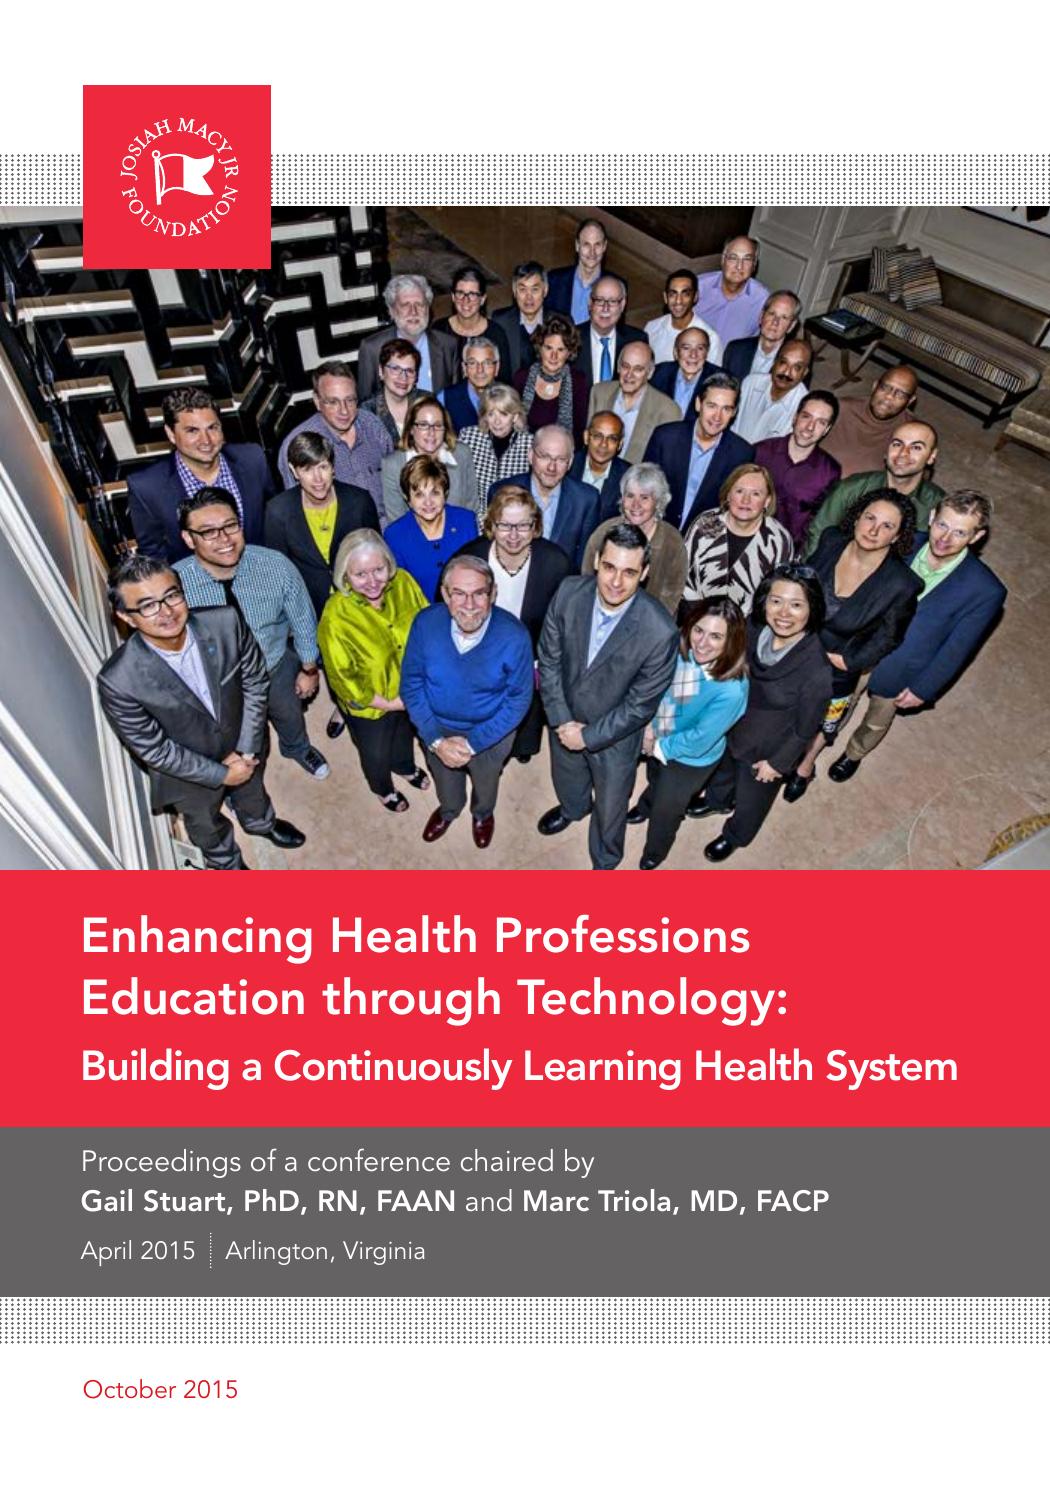 Educational Technologies in Health Professions Education 2015